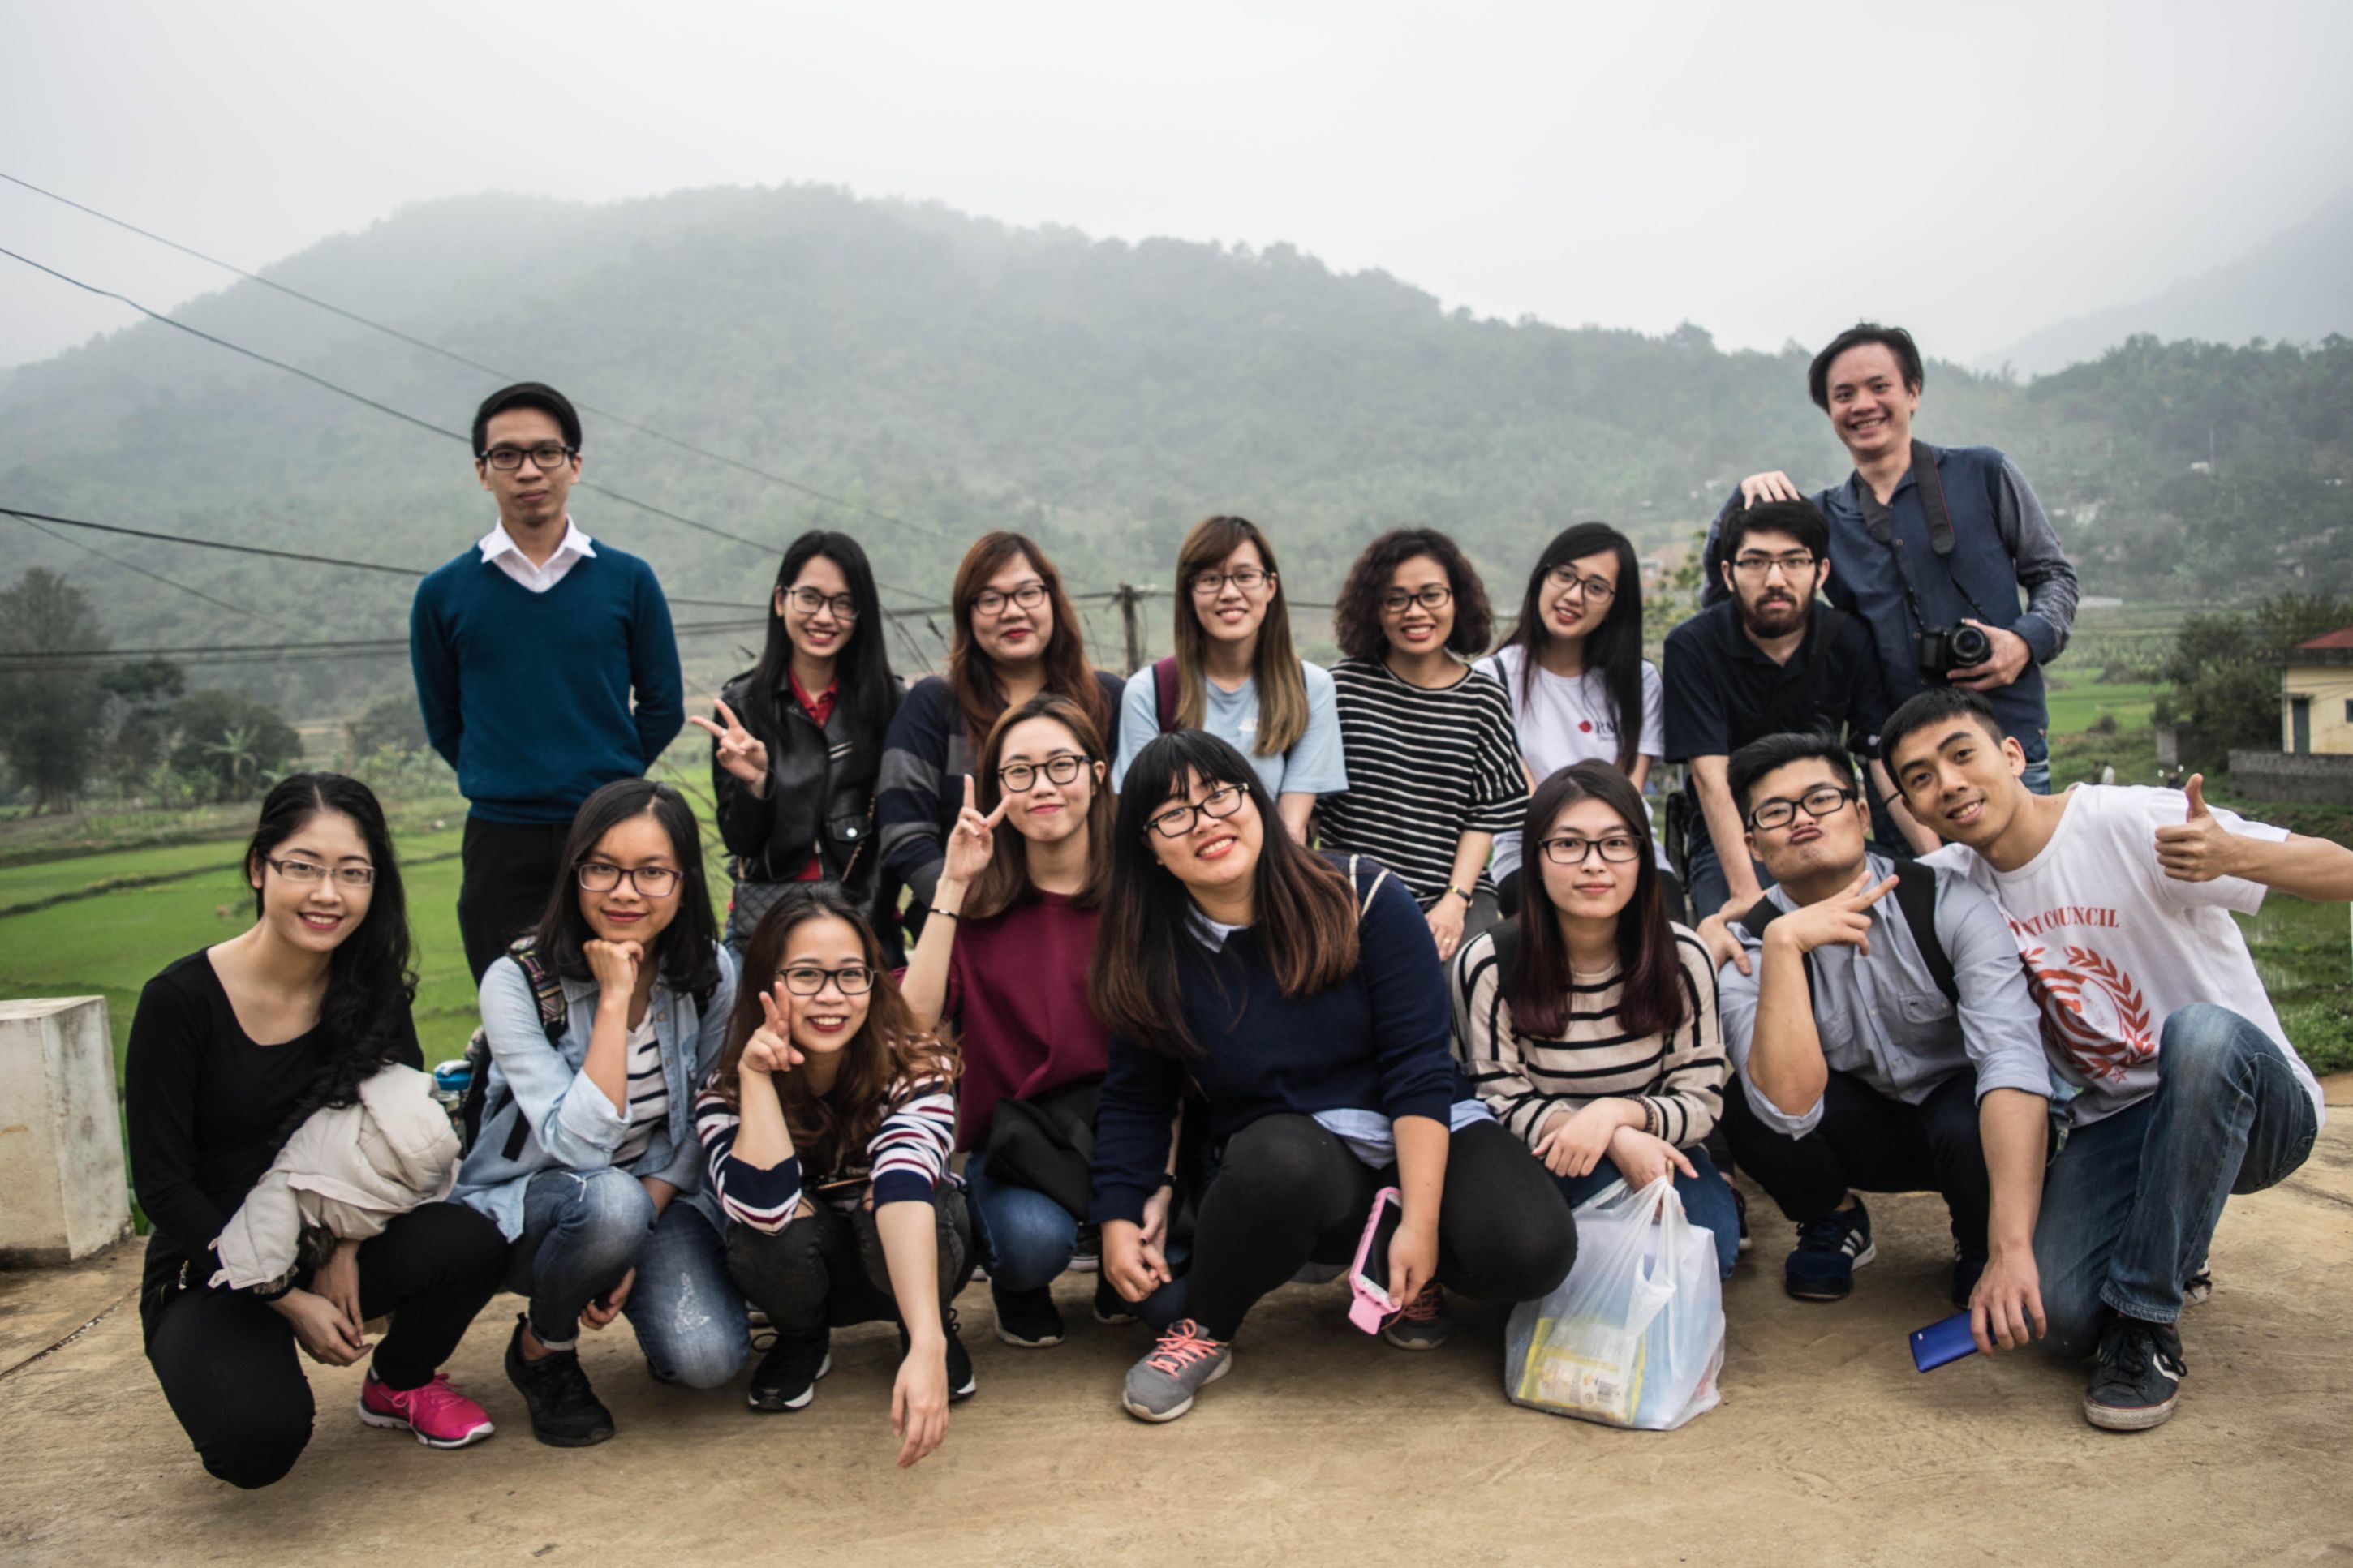 The team went to Hoa Binh to conduct in-depth research and interviews.